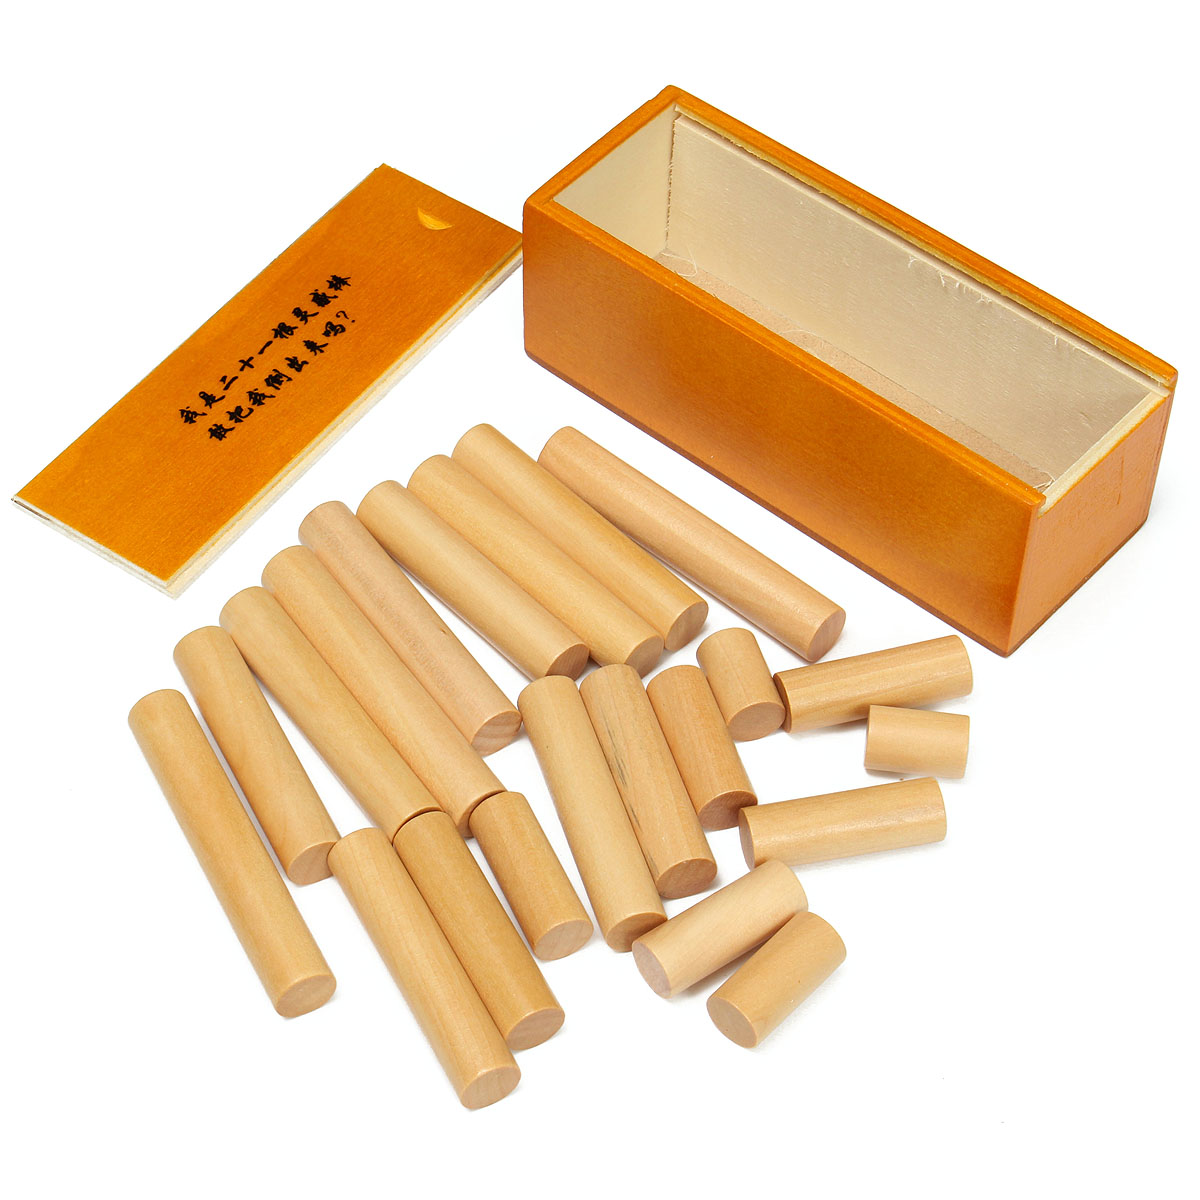 21PCS Adult Wooden Educational Toys Inspired Rod Disassembly Unlock - Photo: 2